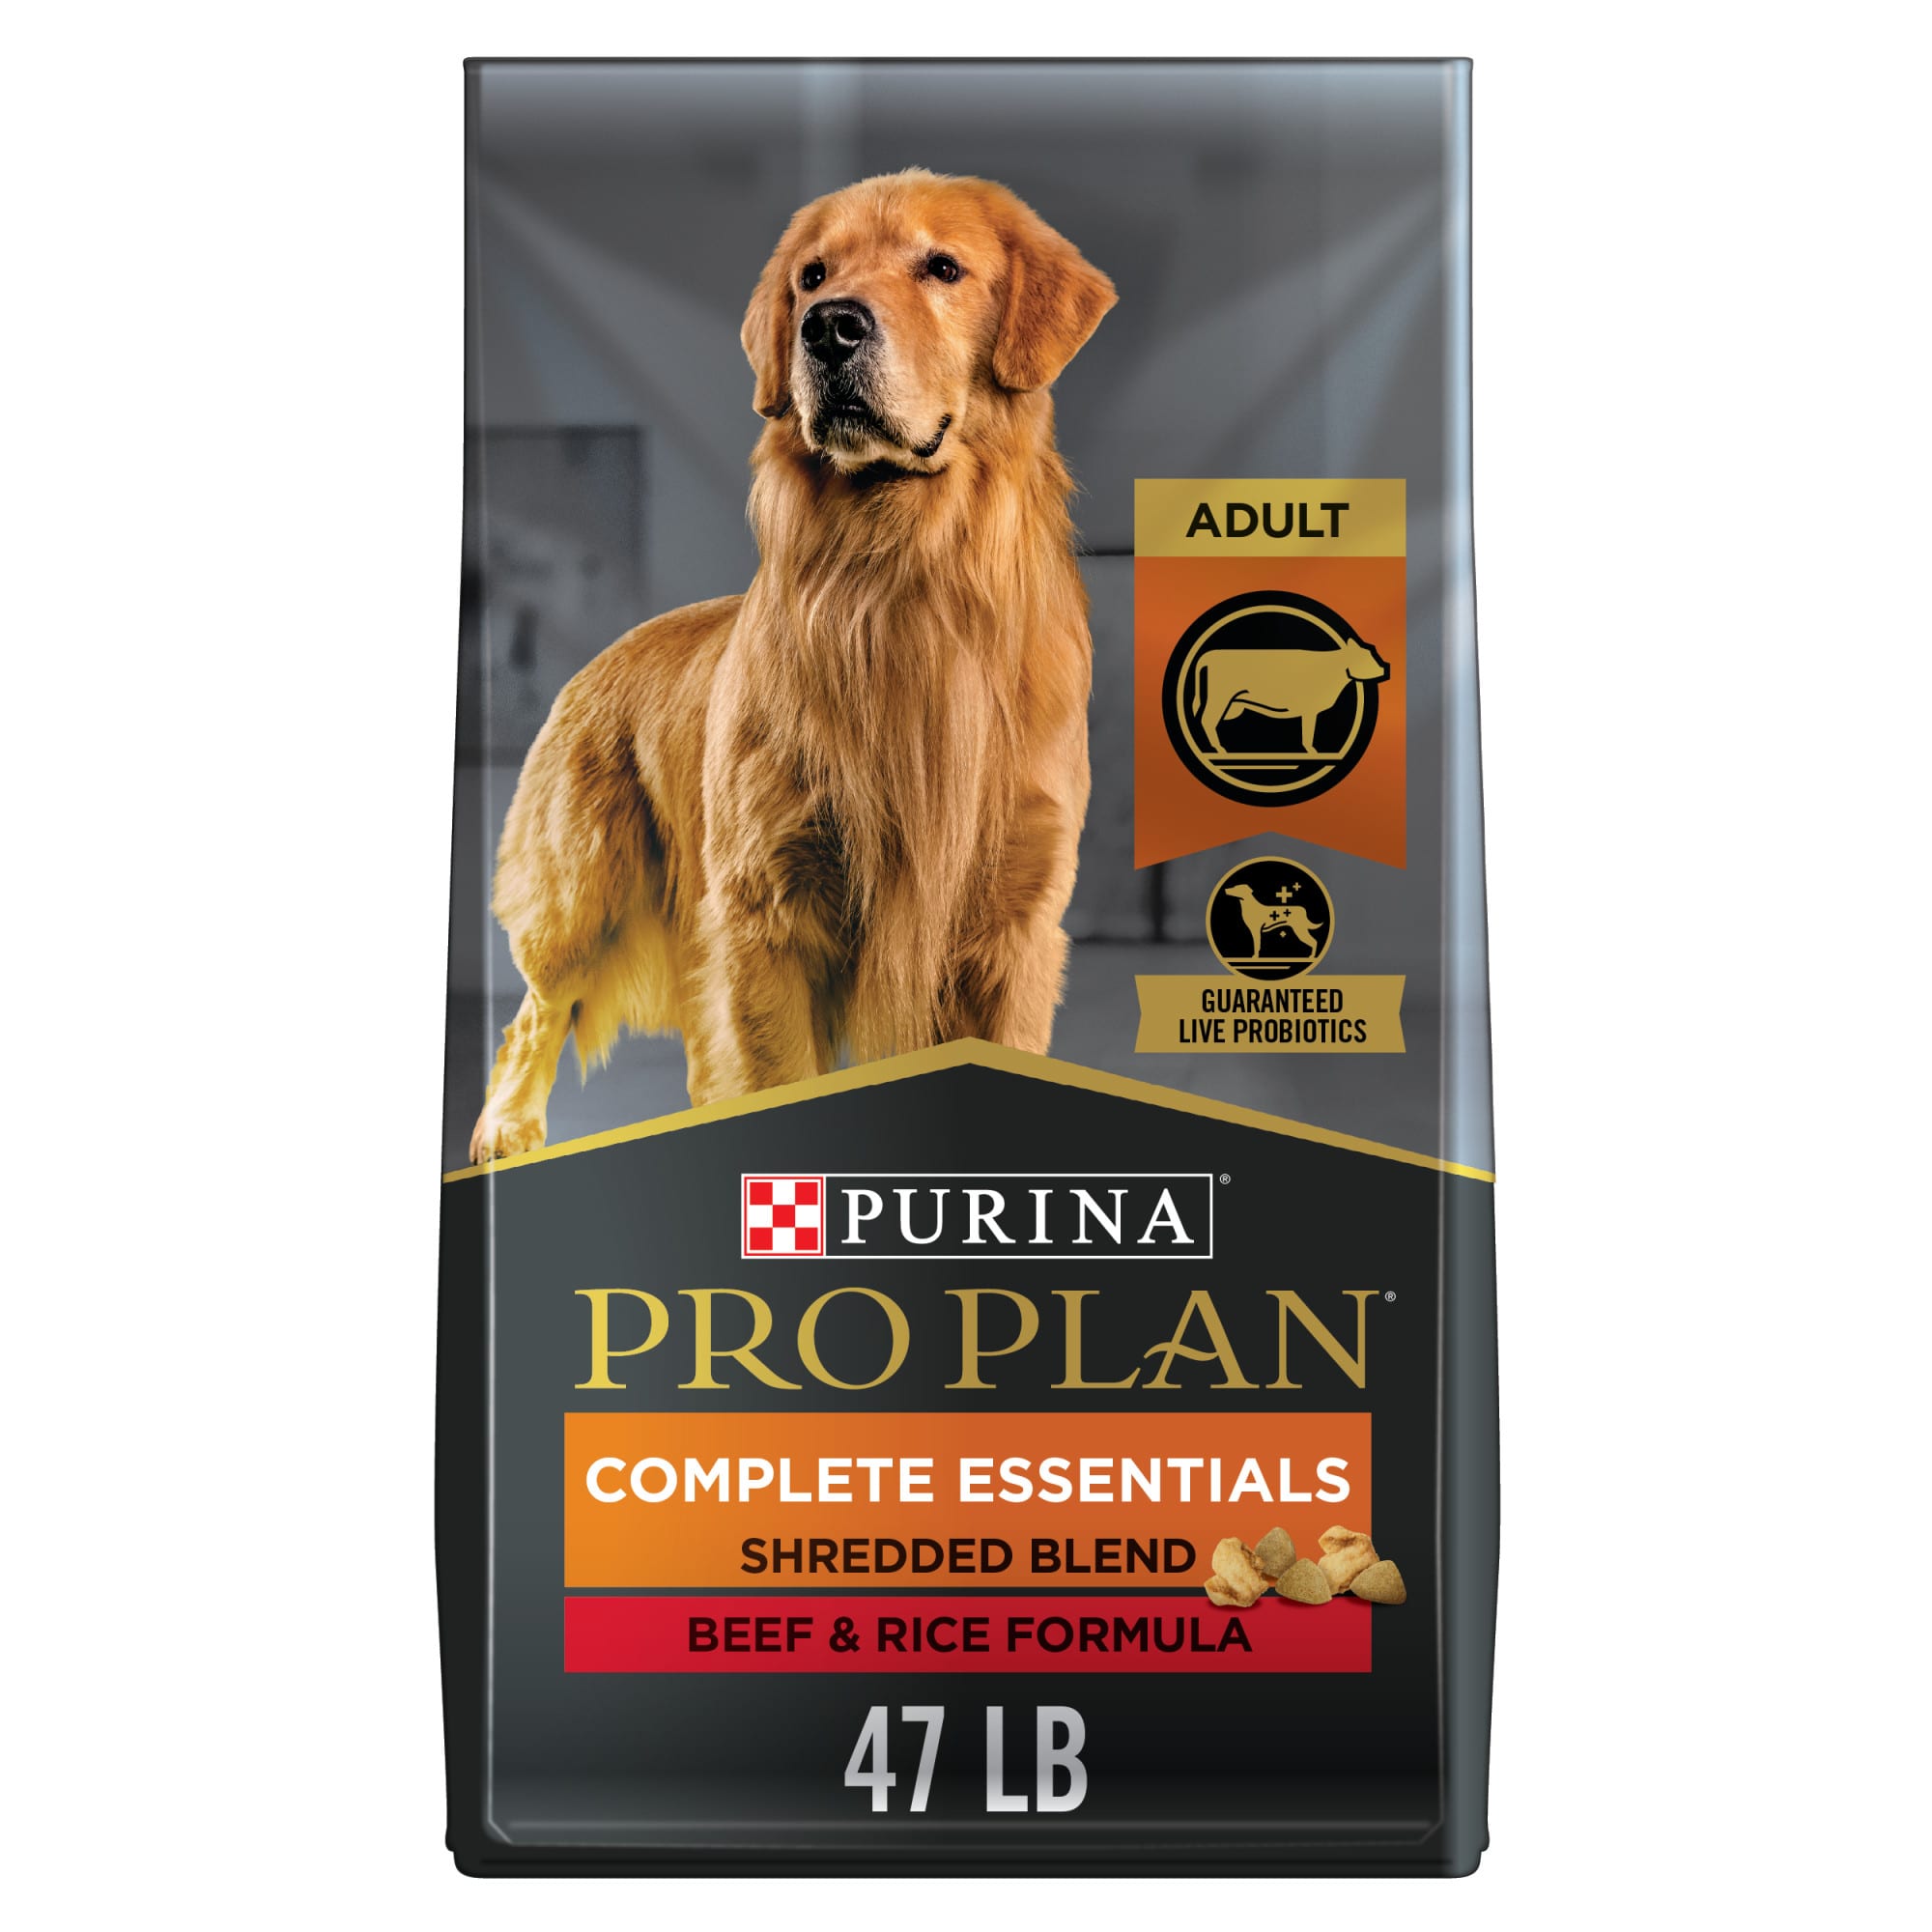 Purina Pro Plan High Protein with Probiotics Shredded Blend Beef & Rice Formula Dry Dog Food, 47 lbs.